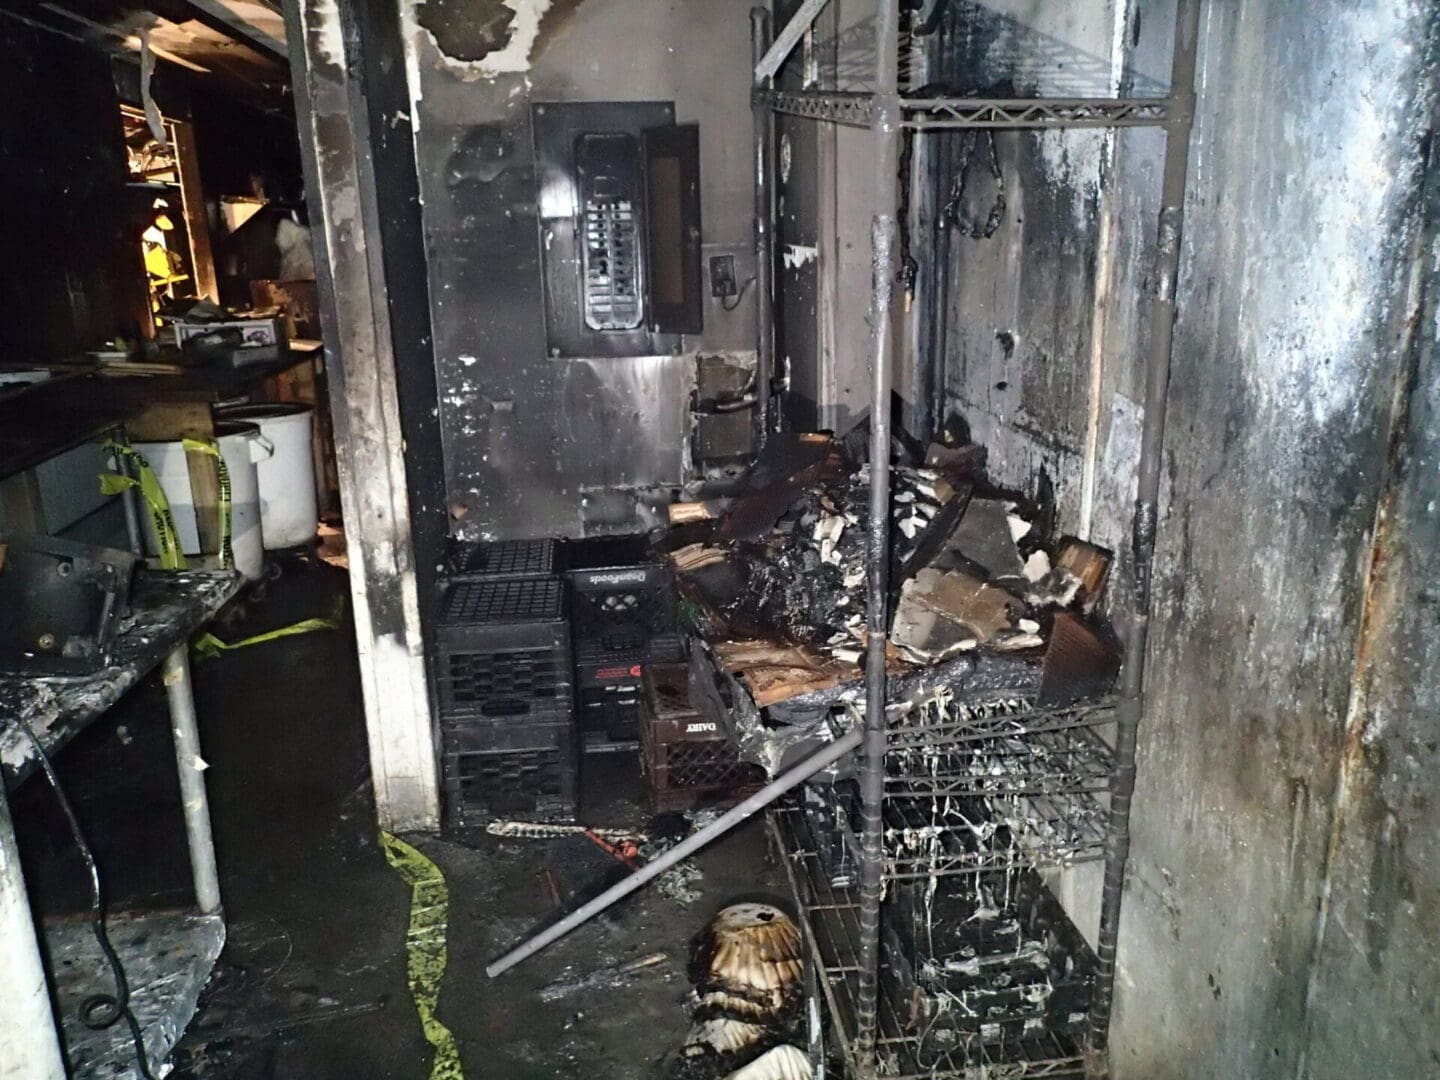 A room that has been burned and is in the middle of fire.